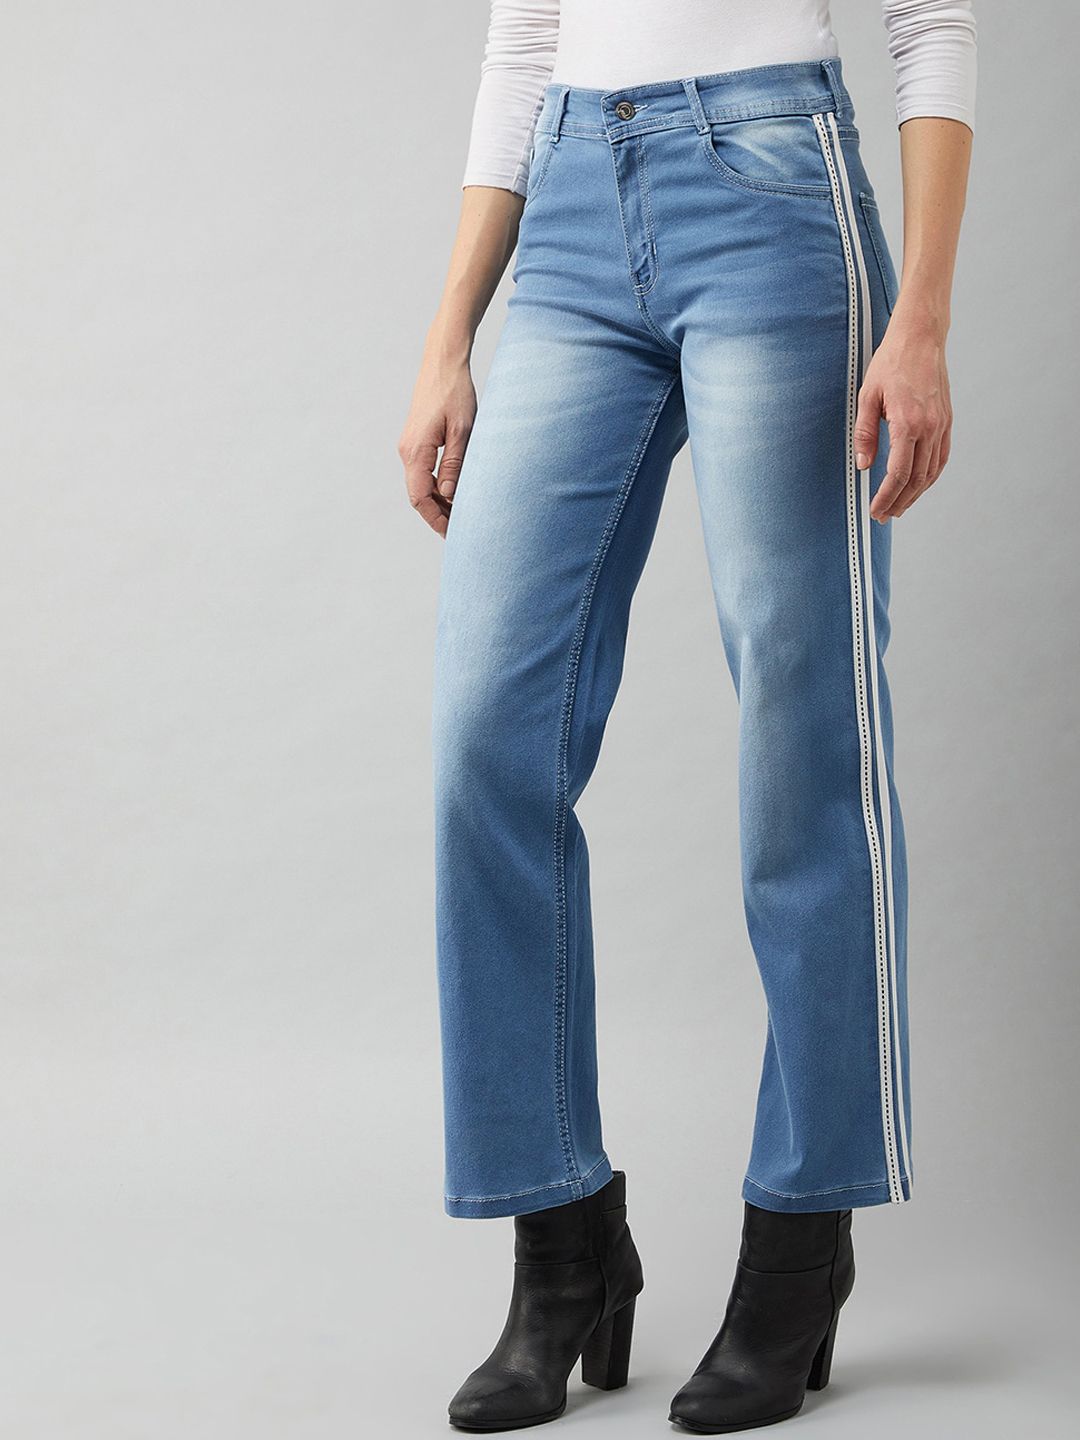 DOLCE CRUDO Blue Wide Leg Stretchable Jeans Price in India